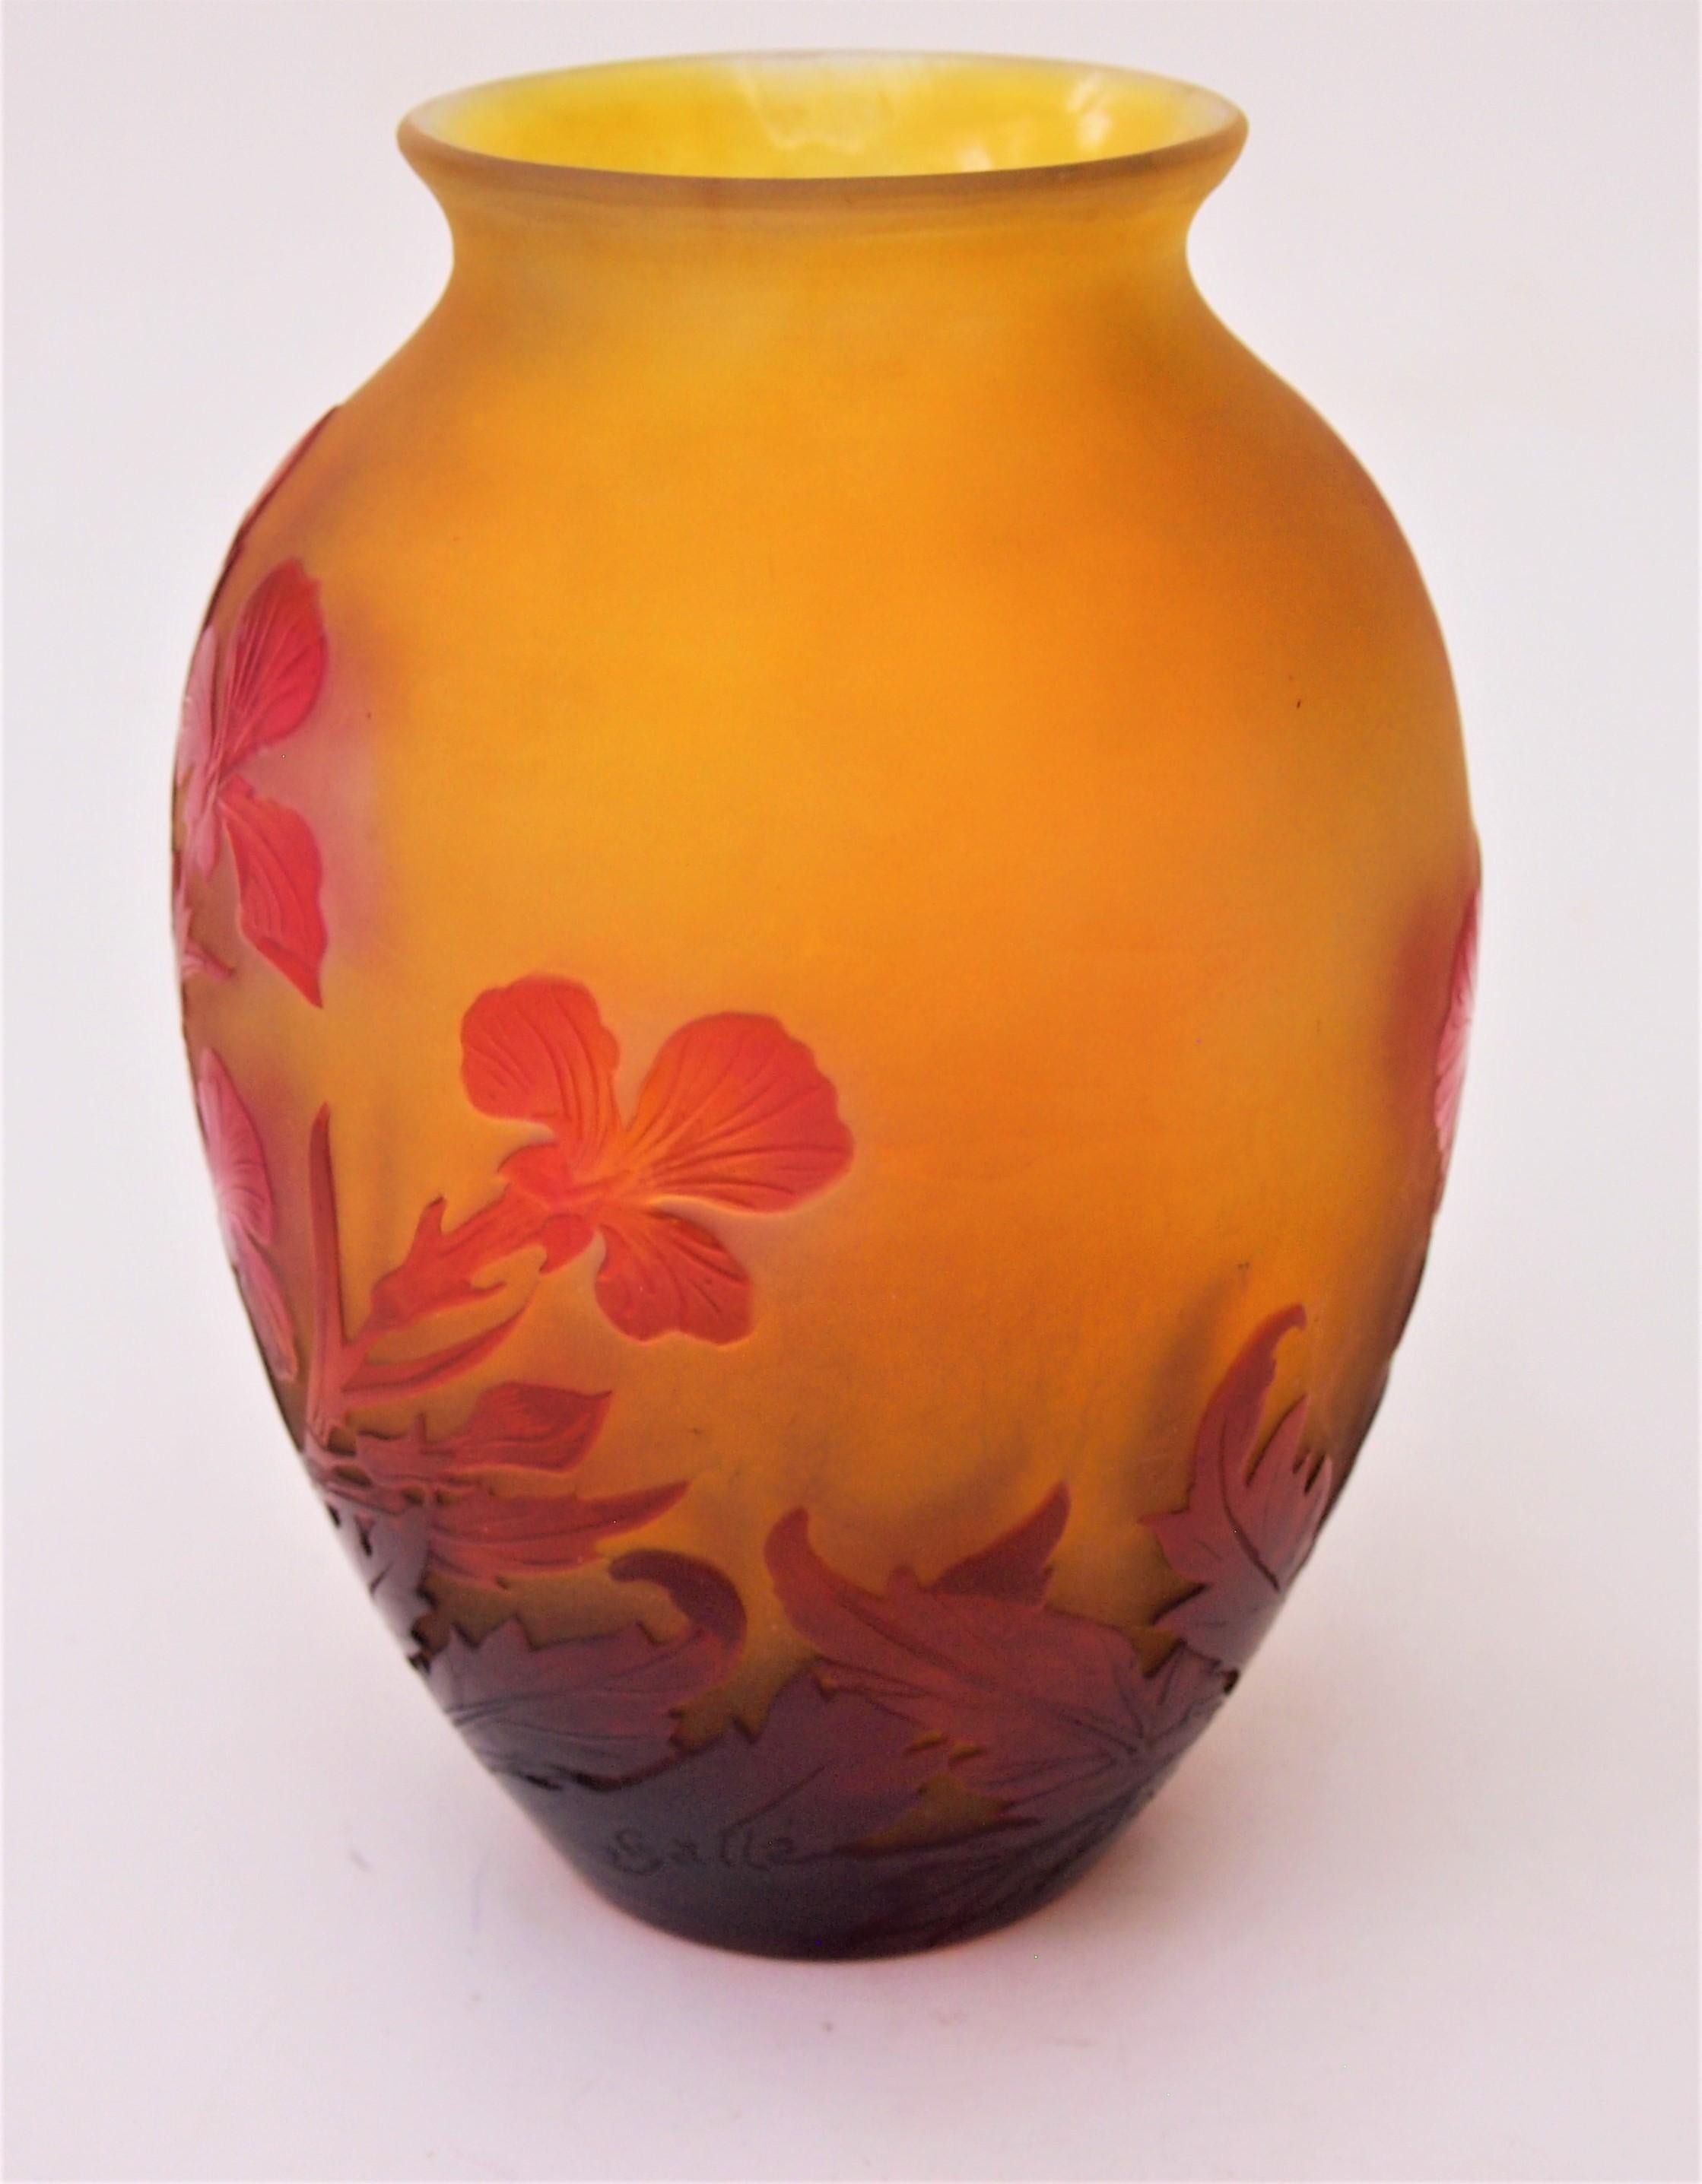 French Art Nouveau Emile Gallé  ball shaped cameo vase depicting Irises in reds over orange with a slightly flared opening. It has fine internal polishing to highlight the red in the irises, (this is sometimes called window pane technique one of the